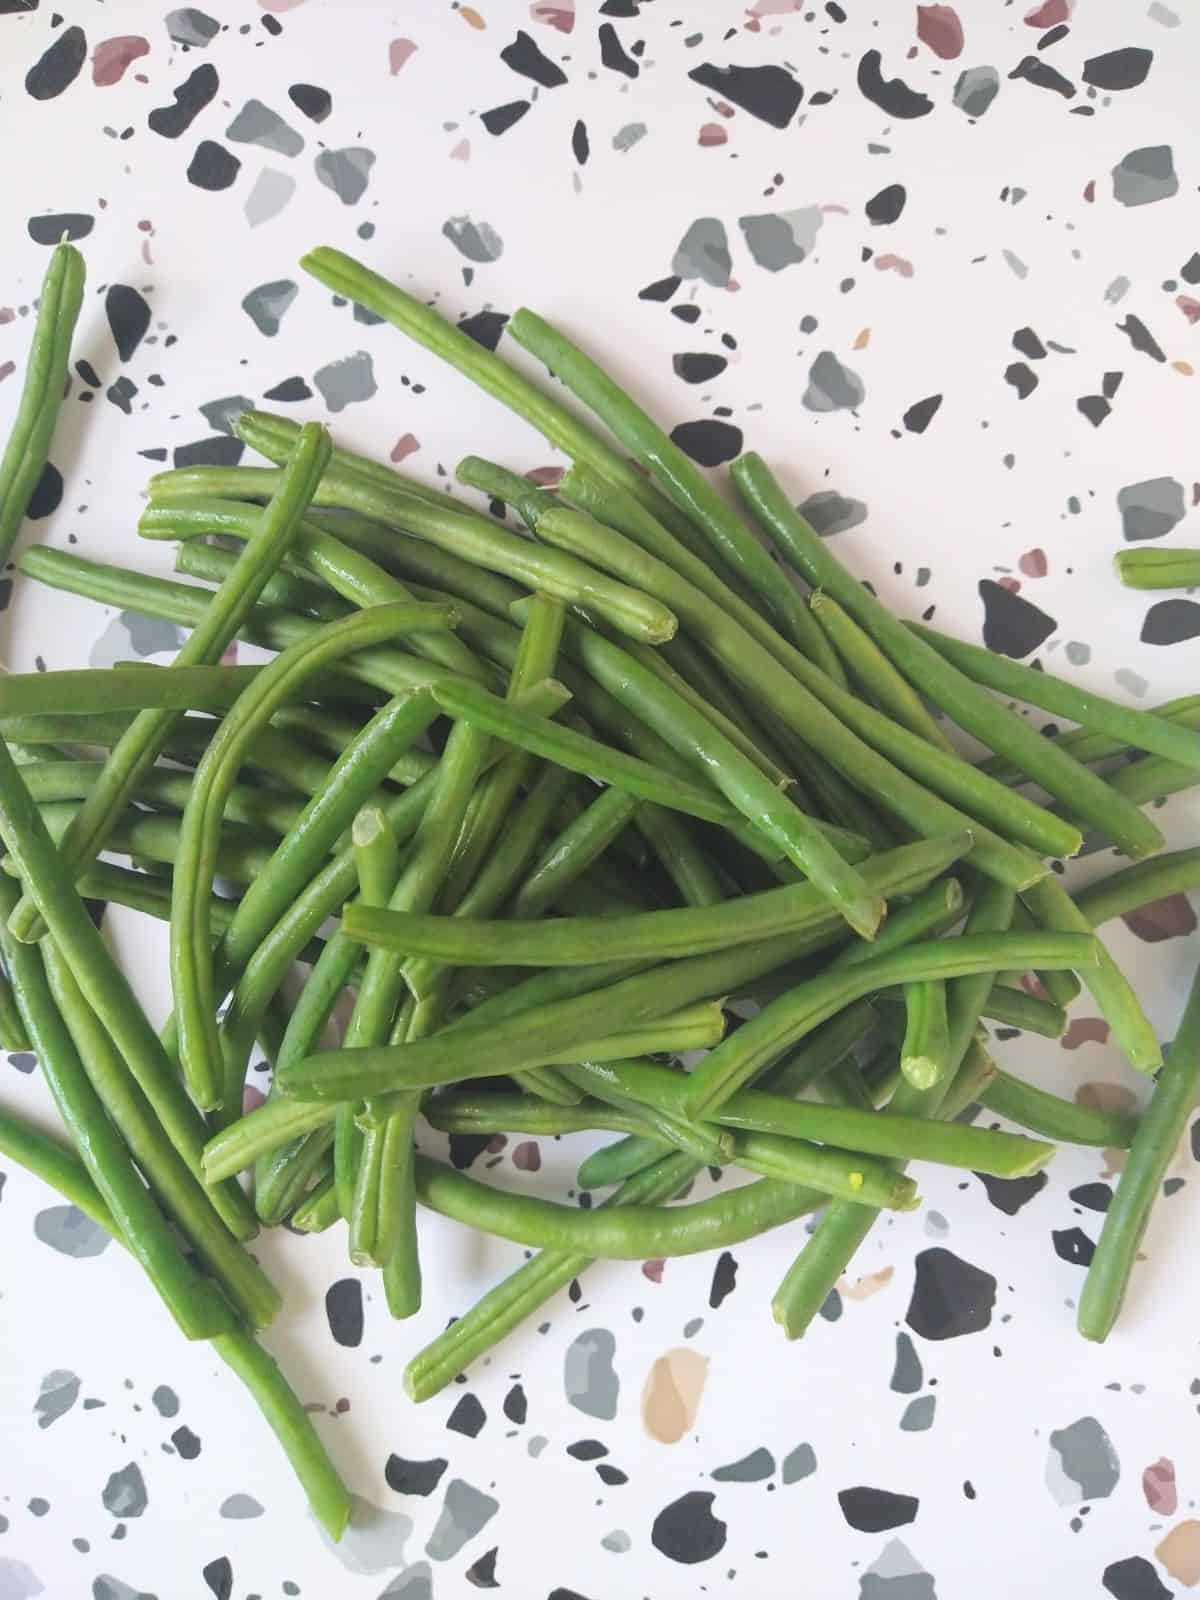 Raw French beans on a table that is white with gray, black, and brown spots.